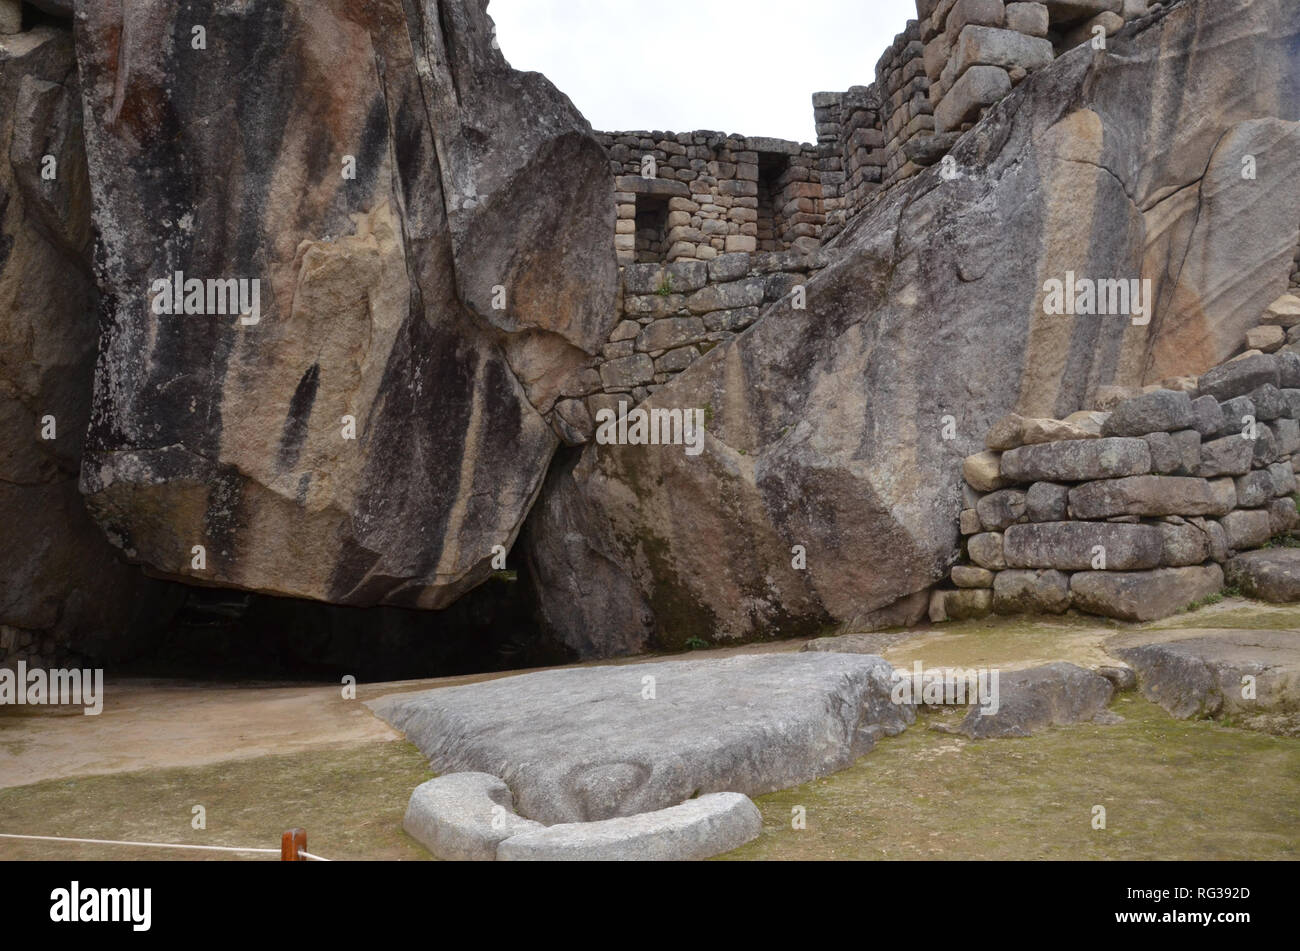 MACHU PICCHU / PERU, August 16, 2018: The rocks in the condor temple at Machu Picchu are shaped like condor wings and its head. Stock Photo